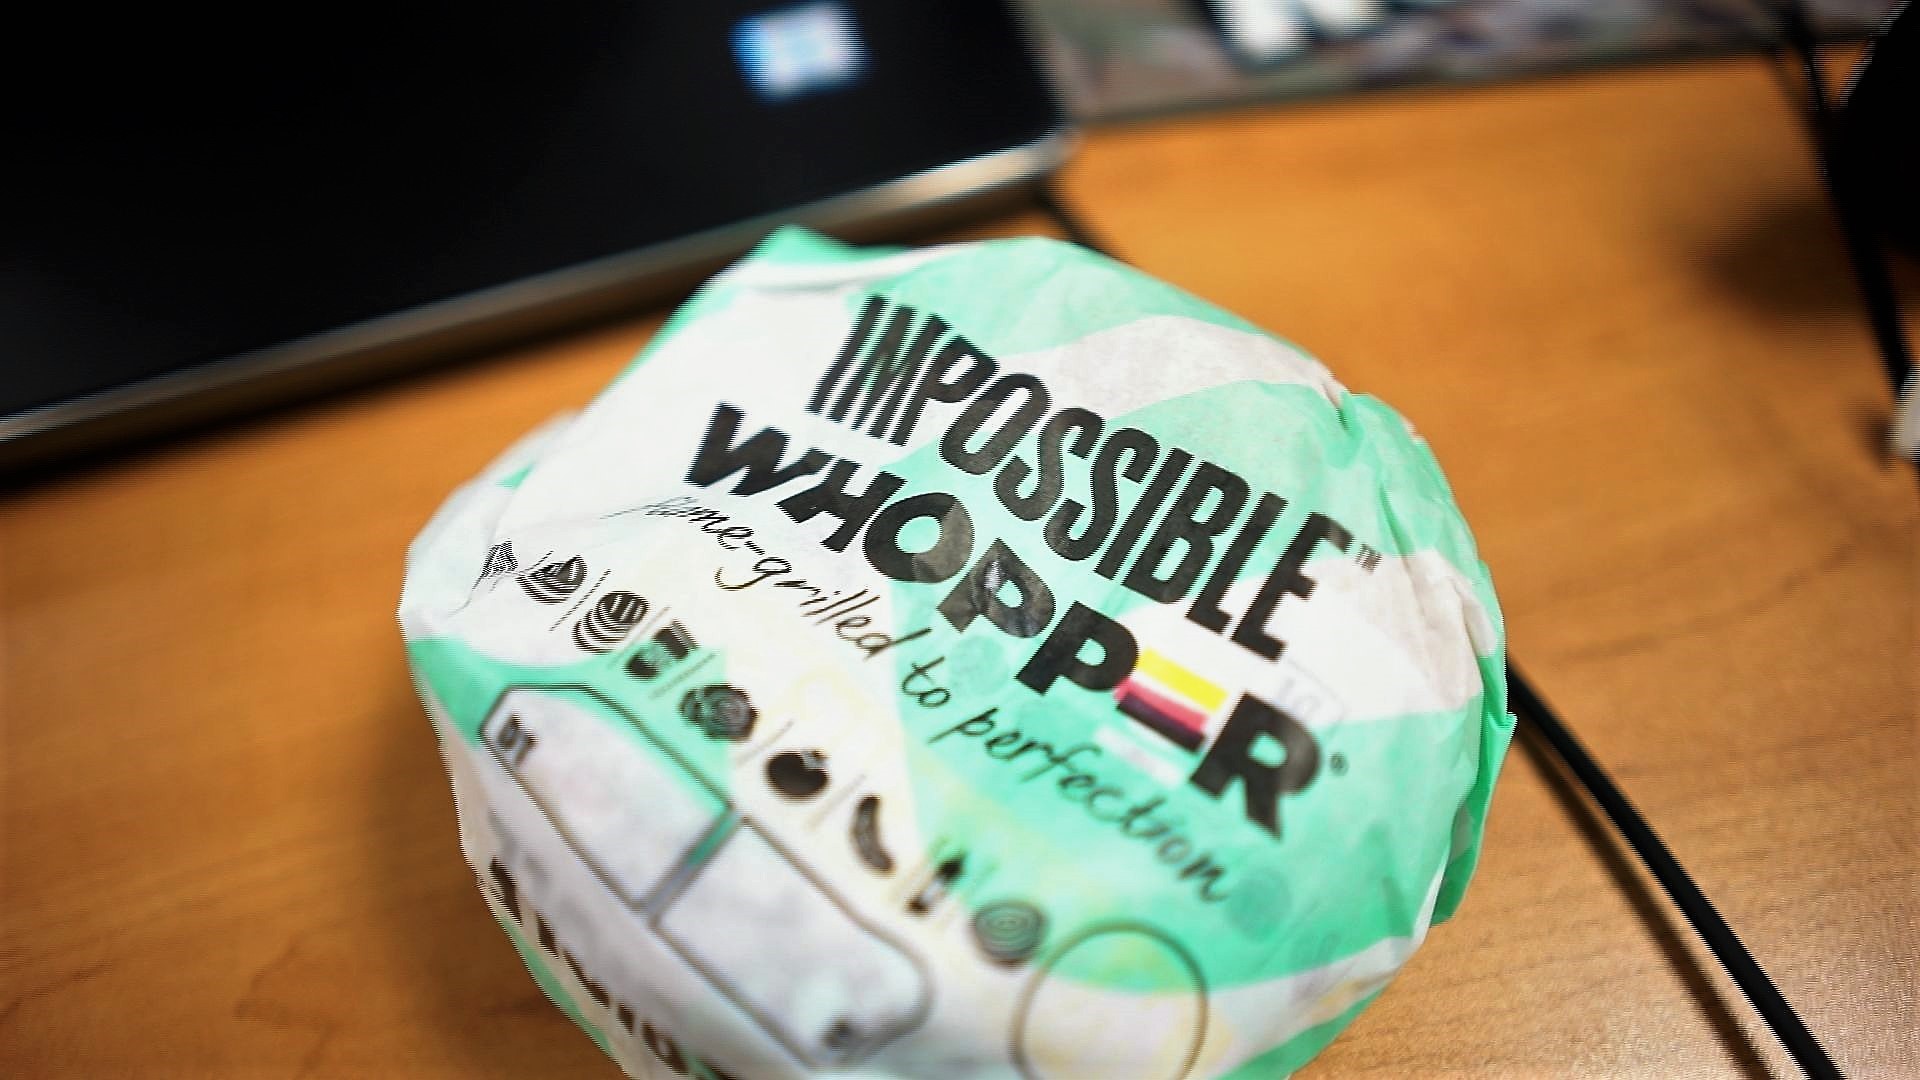 Meatless options have taken the food industry by storm. 13WMAZ decided to try out the Impossible Whopper.